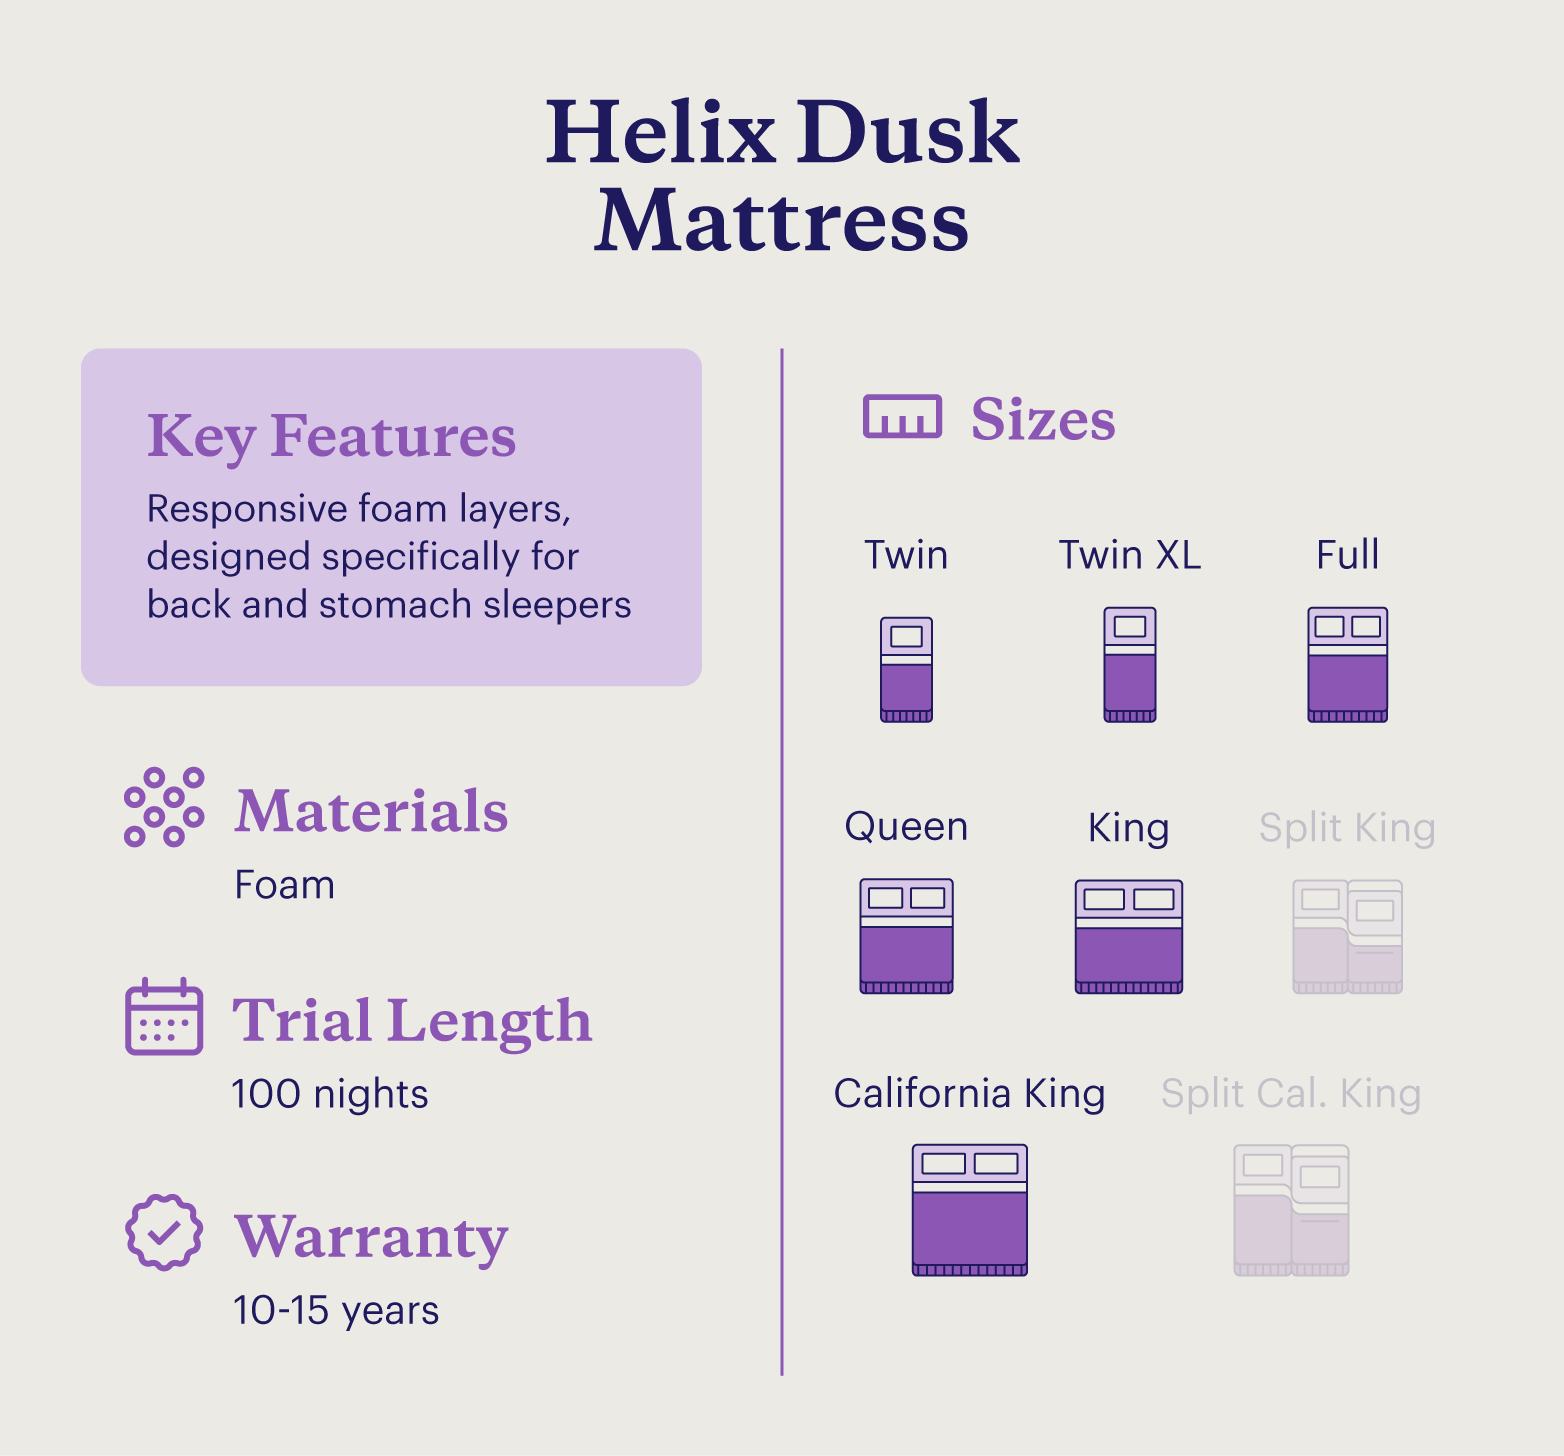 A chart showing information about the Helix Dusk Mattress.